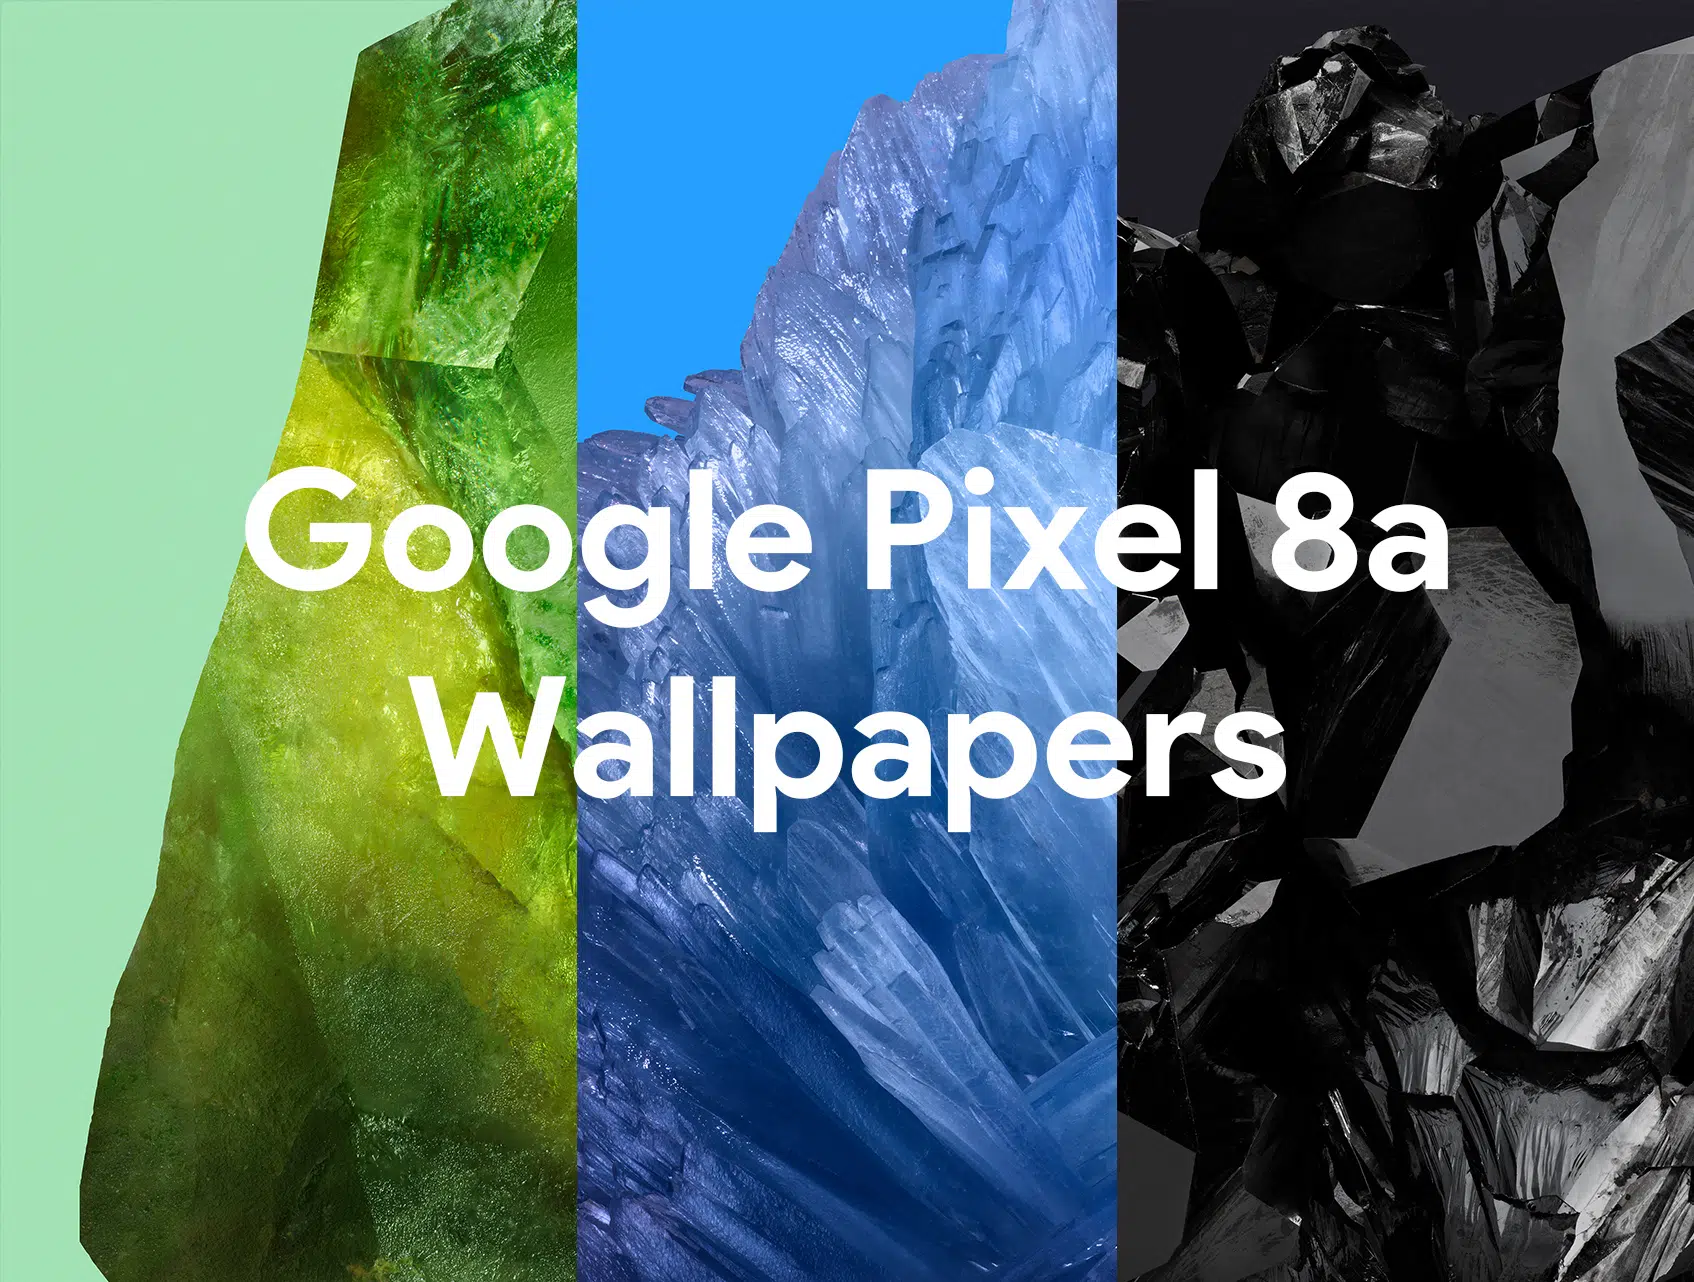 Google Pixel 8a wallpapers are leaked, better than 8 Pro